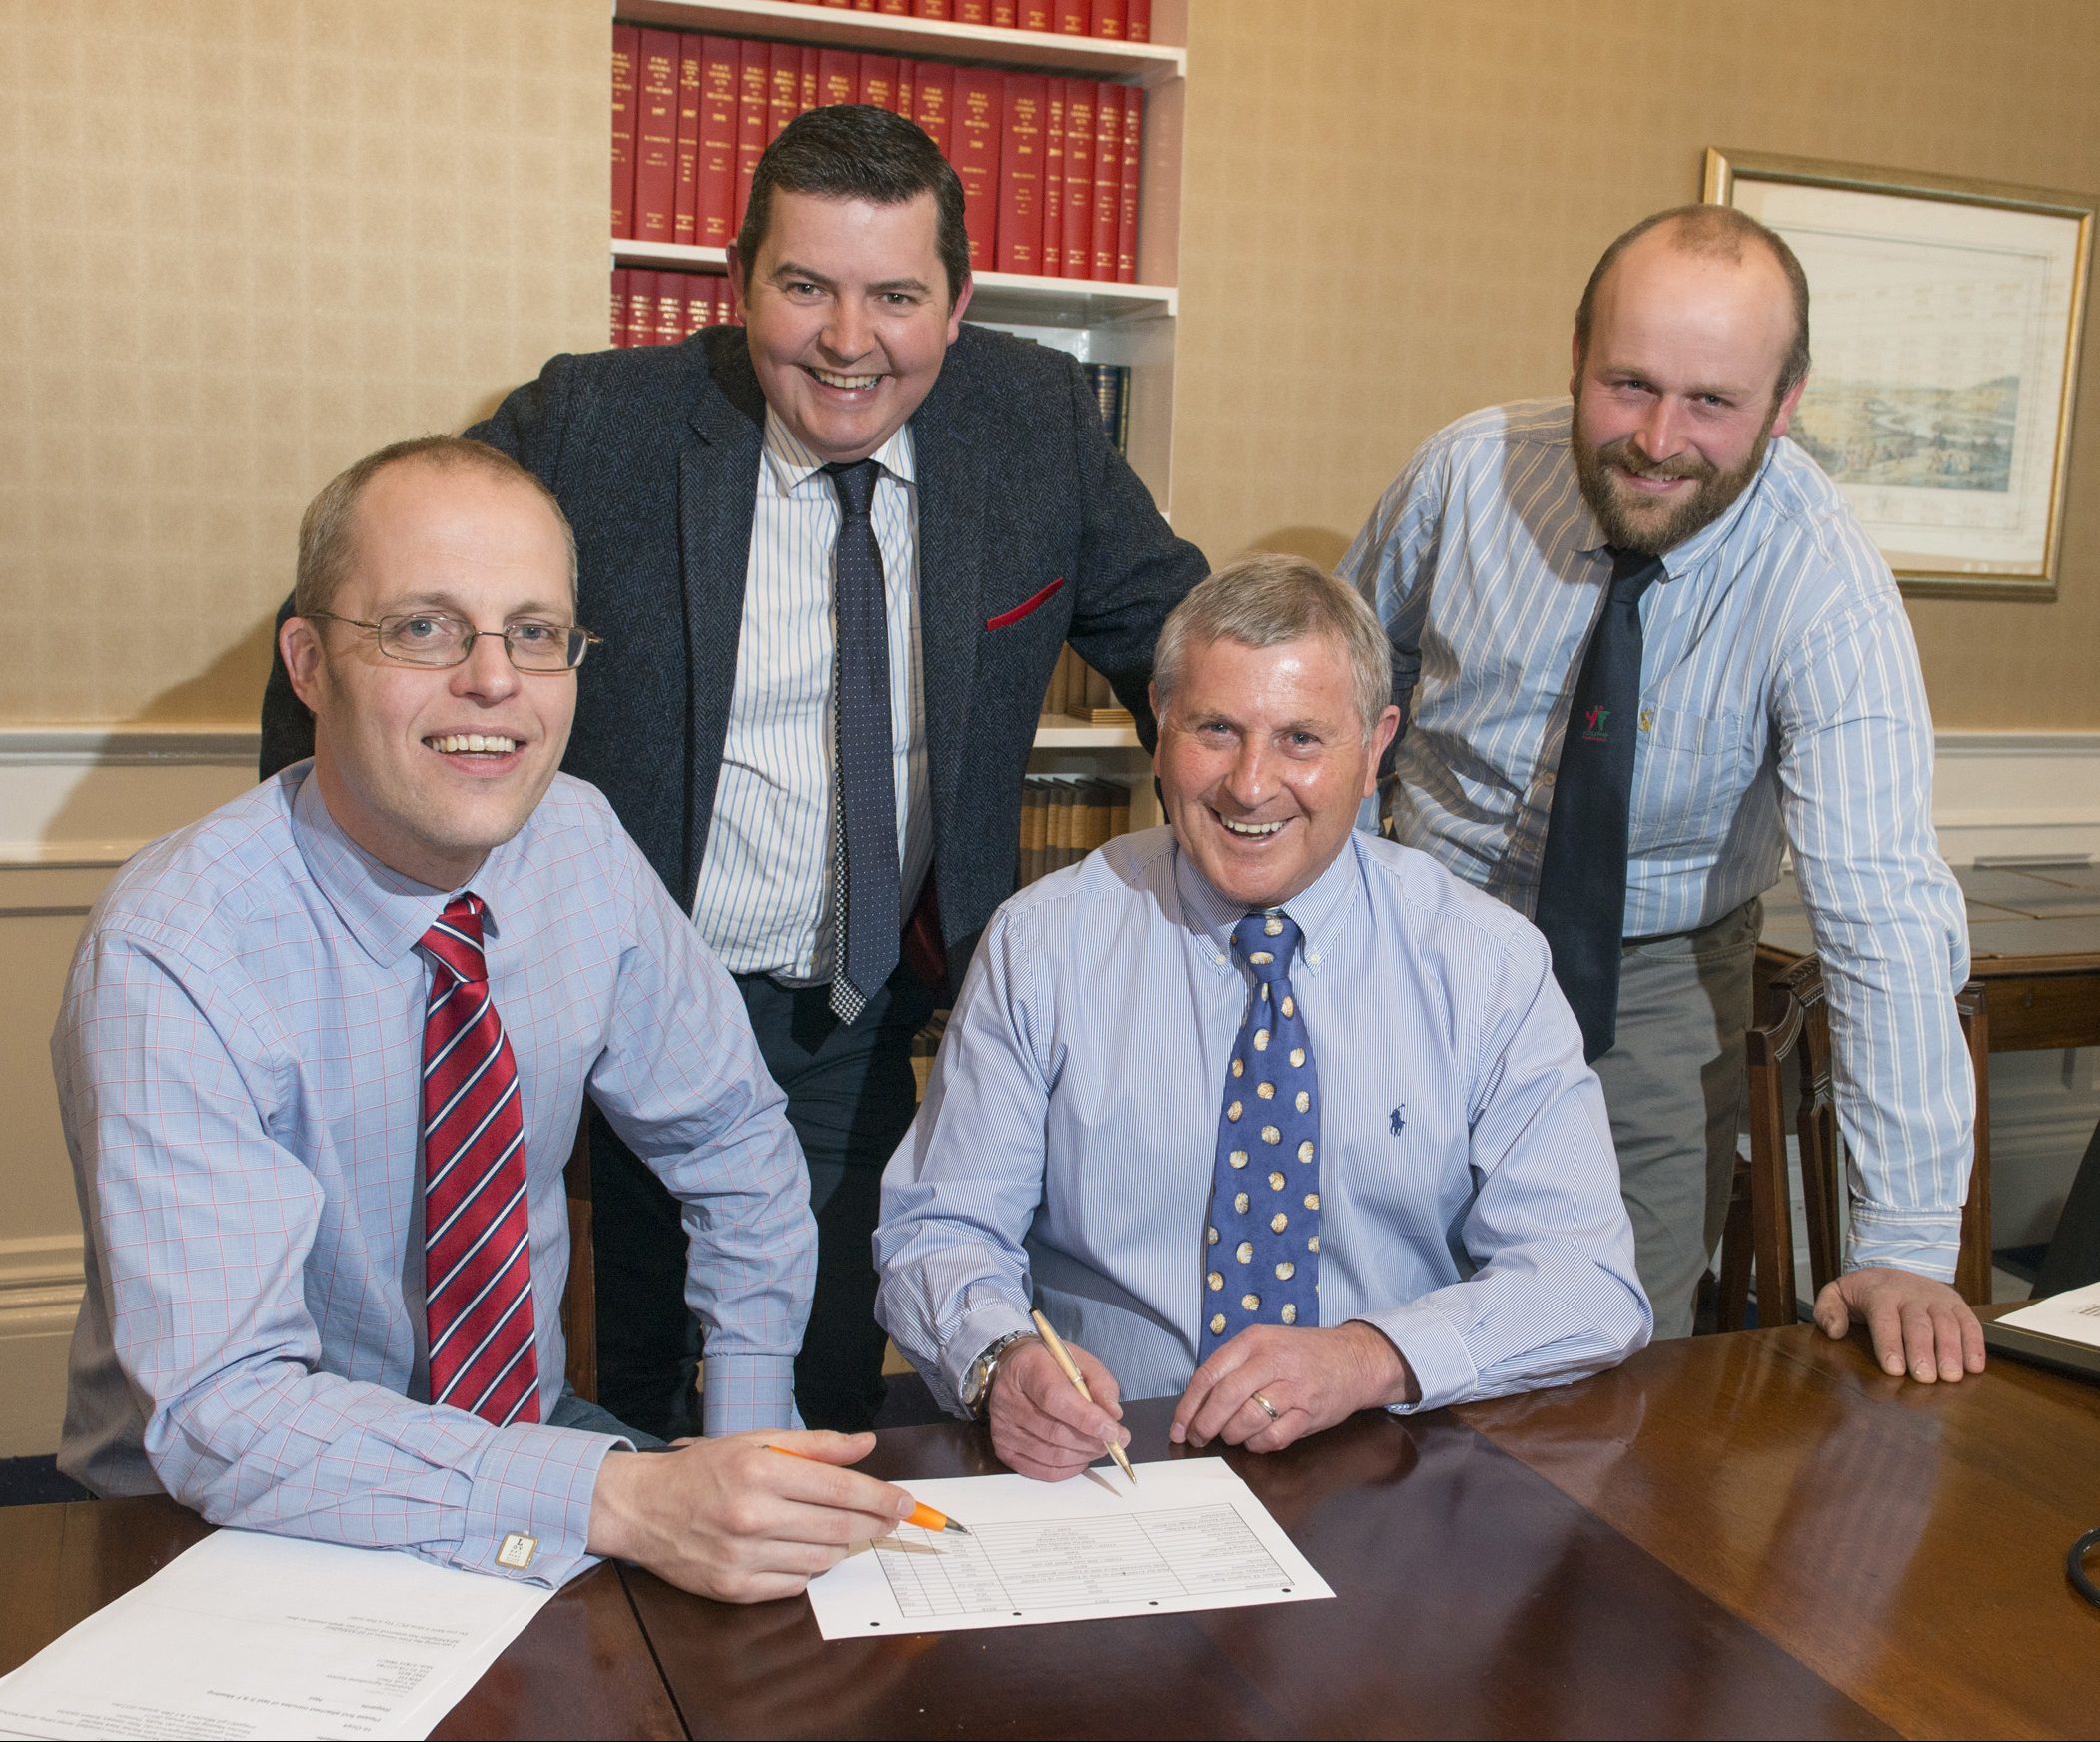 Perthshire Agricultural Society’s new chairman Peter Stewart (seated left) with his senior team for 2017 – vice chairman John Ritchie (standing right), junior vice chairman Donald McDiarmid (standing left) and secretary Neil Forbes (seated right). 